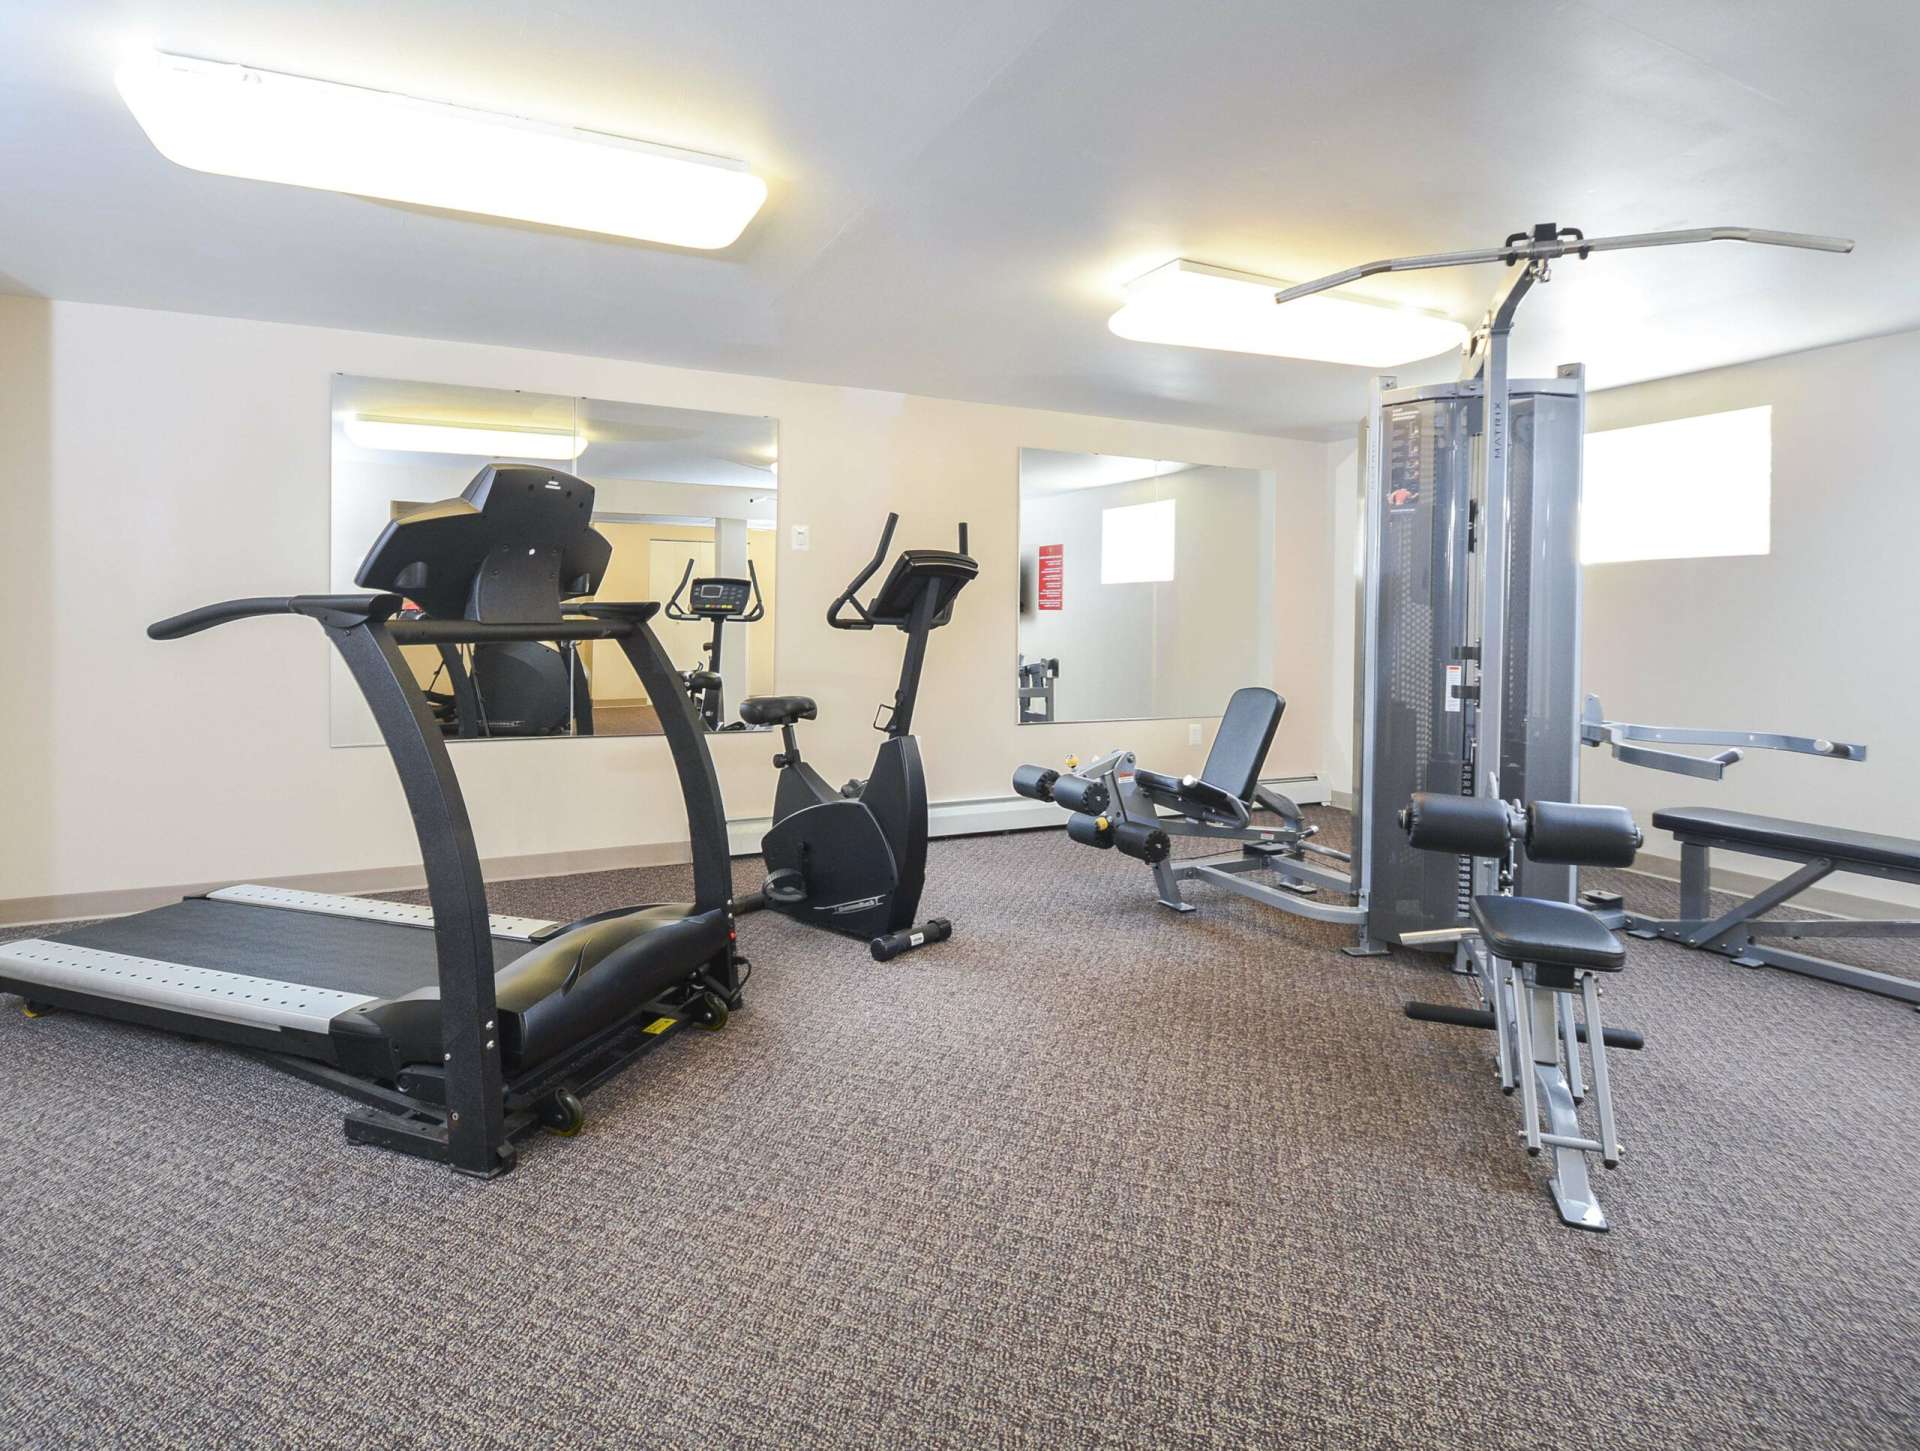 A variety of workout equipment with 2 large mirrors.